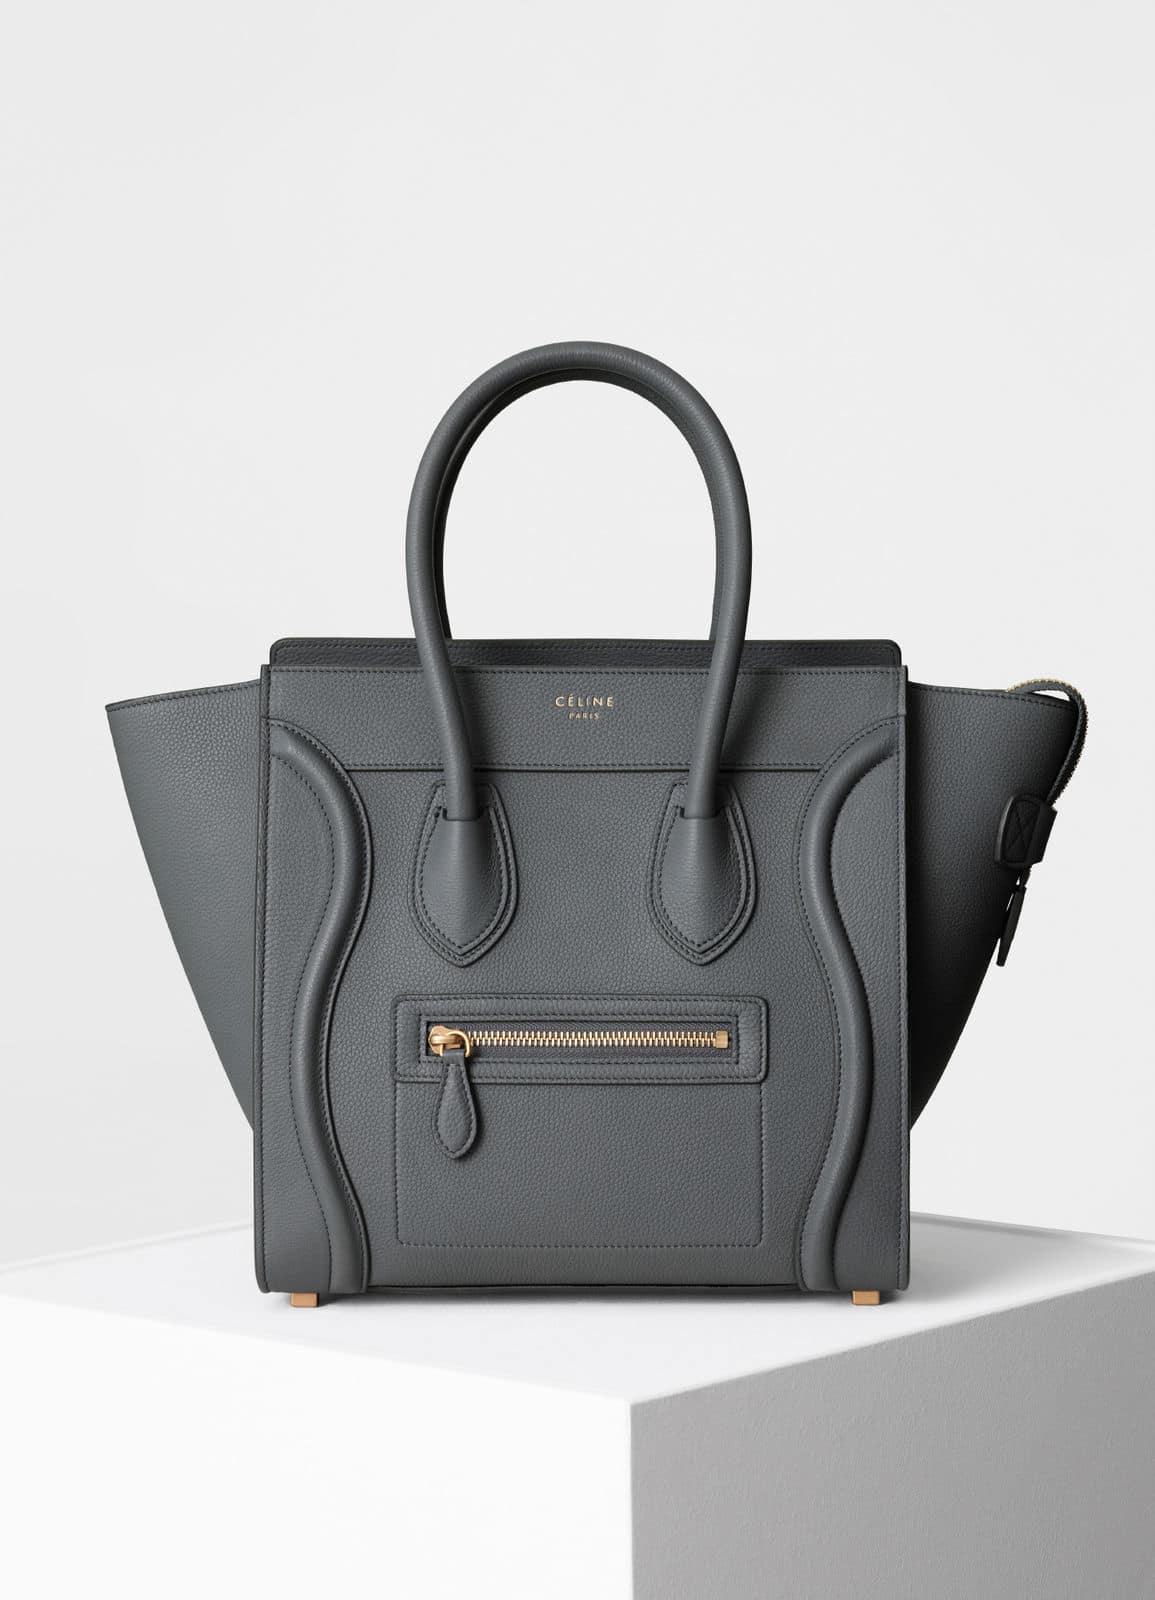 Celine Fall 2018 Bag Collection Featuring The Made in Tote Bags ...